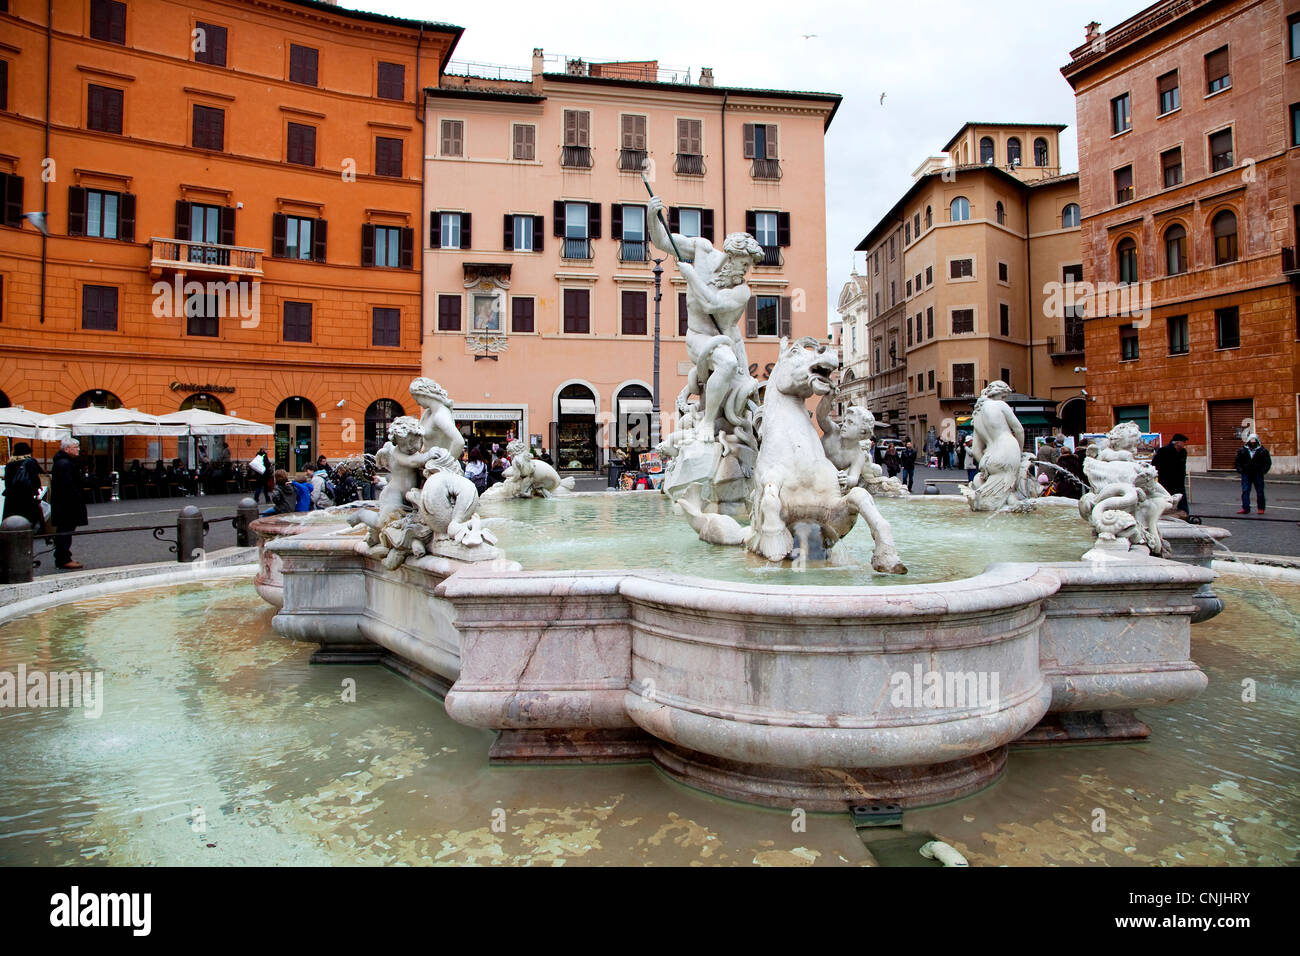 City view of Rome, Italy with monuments, art and tourist attractions. Roma, Italia, Europe. Piazza Navona, Navona square Stock Photo